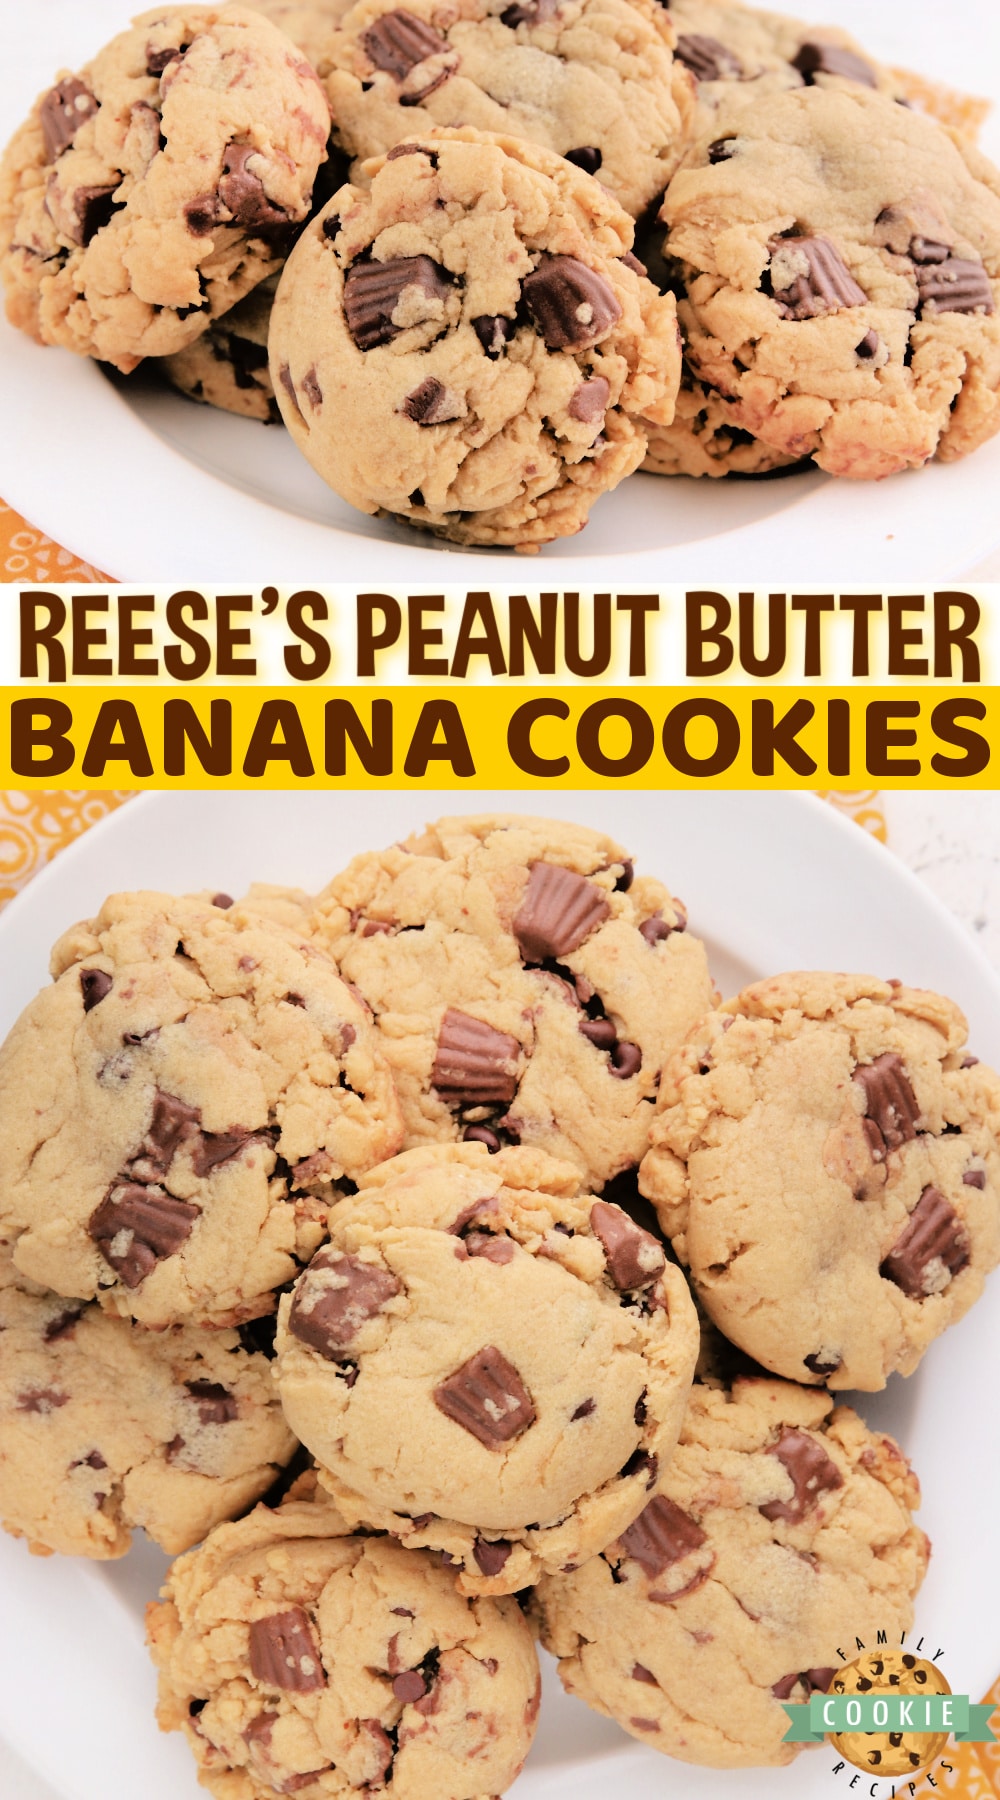 Reese's Peanut Butter Banana Cookies made with Reese's peanut butter cups, chocolate chips, peanut butter and banana pudding mix. Best flavor combination all together in one delicious cookie recipe! via @buttergirls